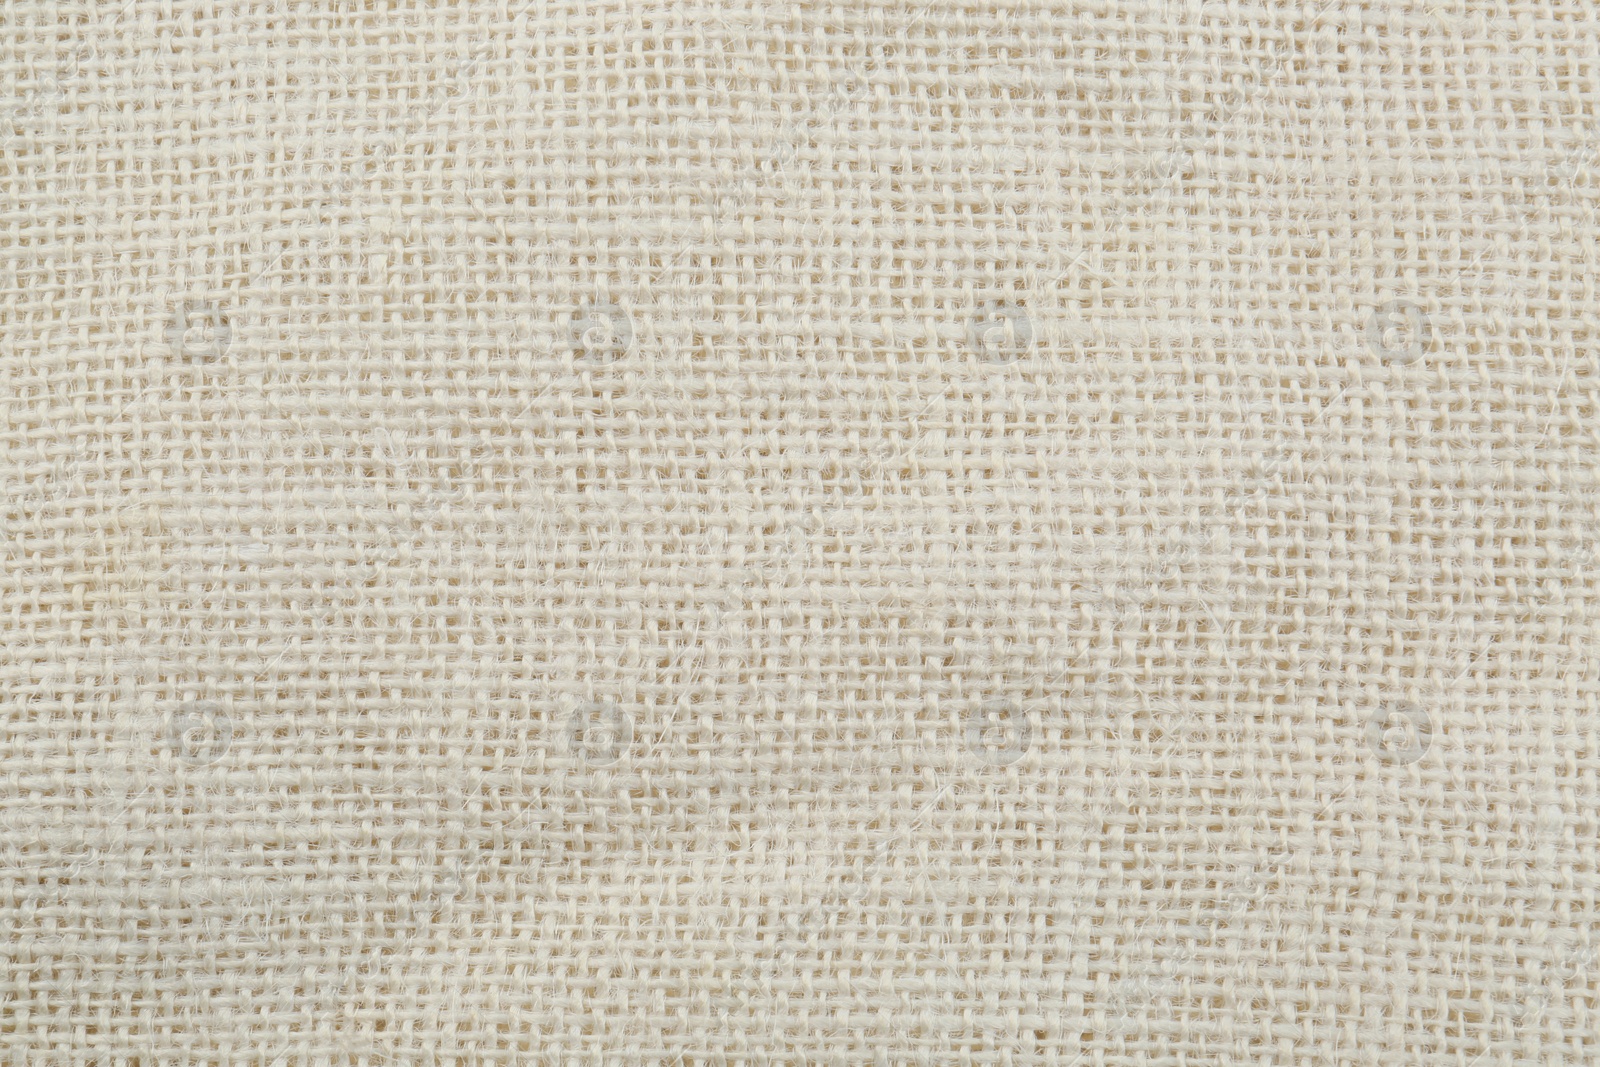 Photo of Texture of burlap fabric as background, top view